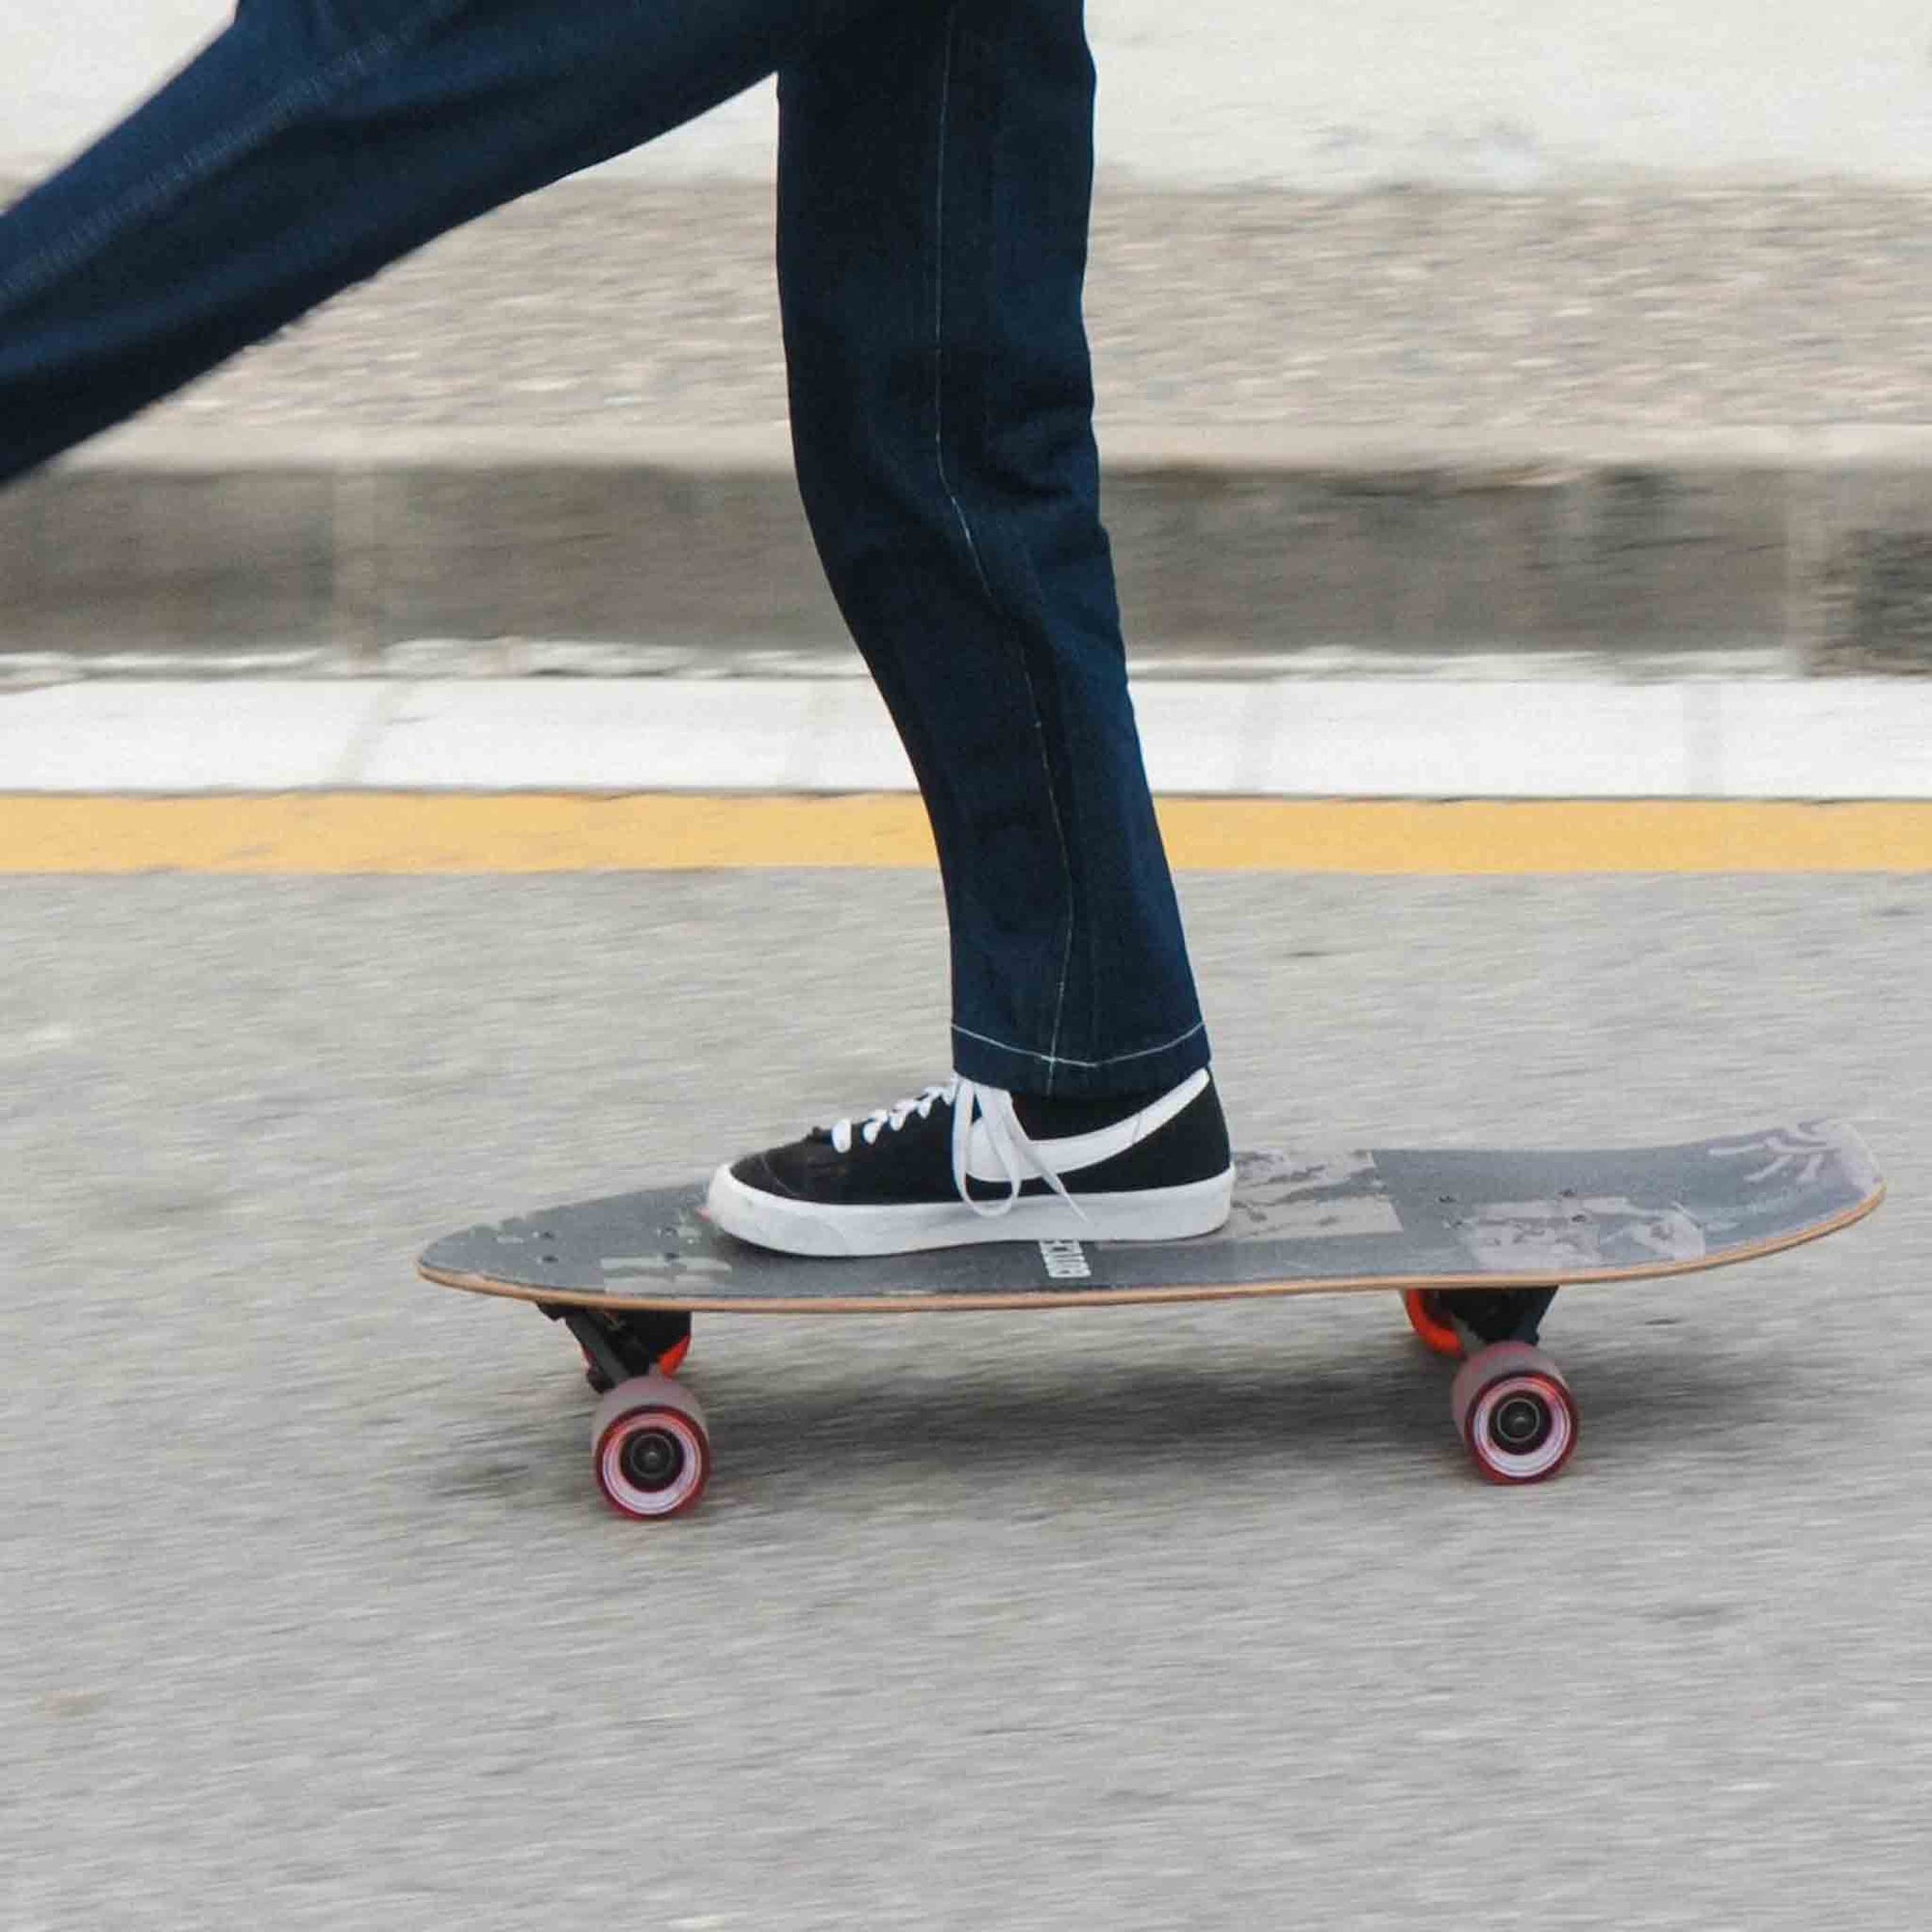 Which Complete Skateboards to consider?